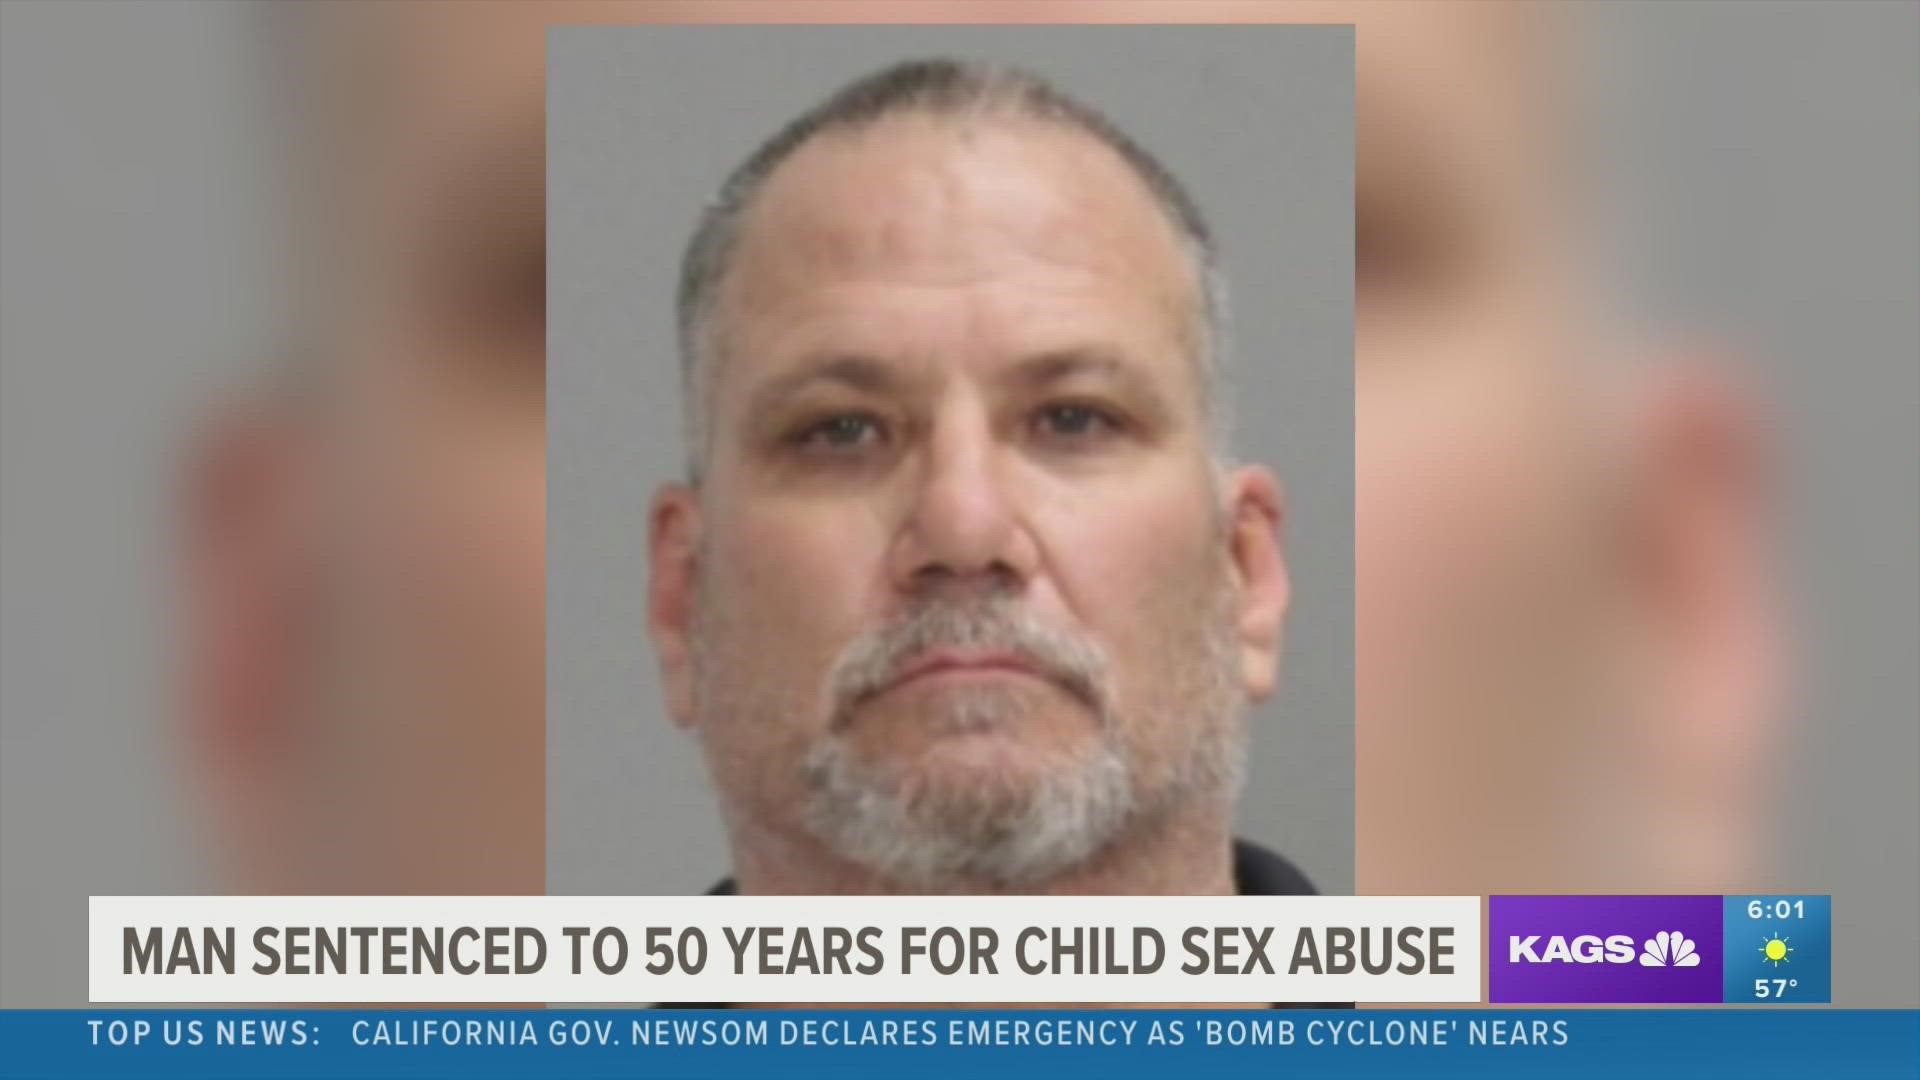 Authorities Man given 50 year sentence for child sexual crimes kagstv